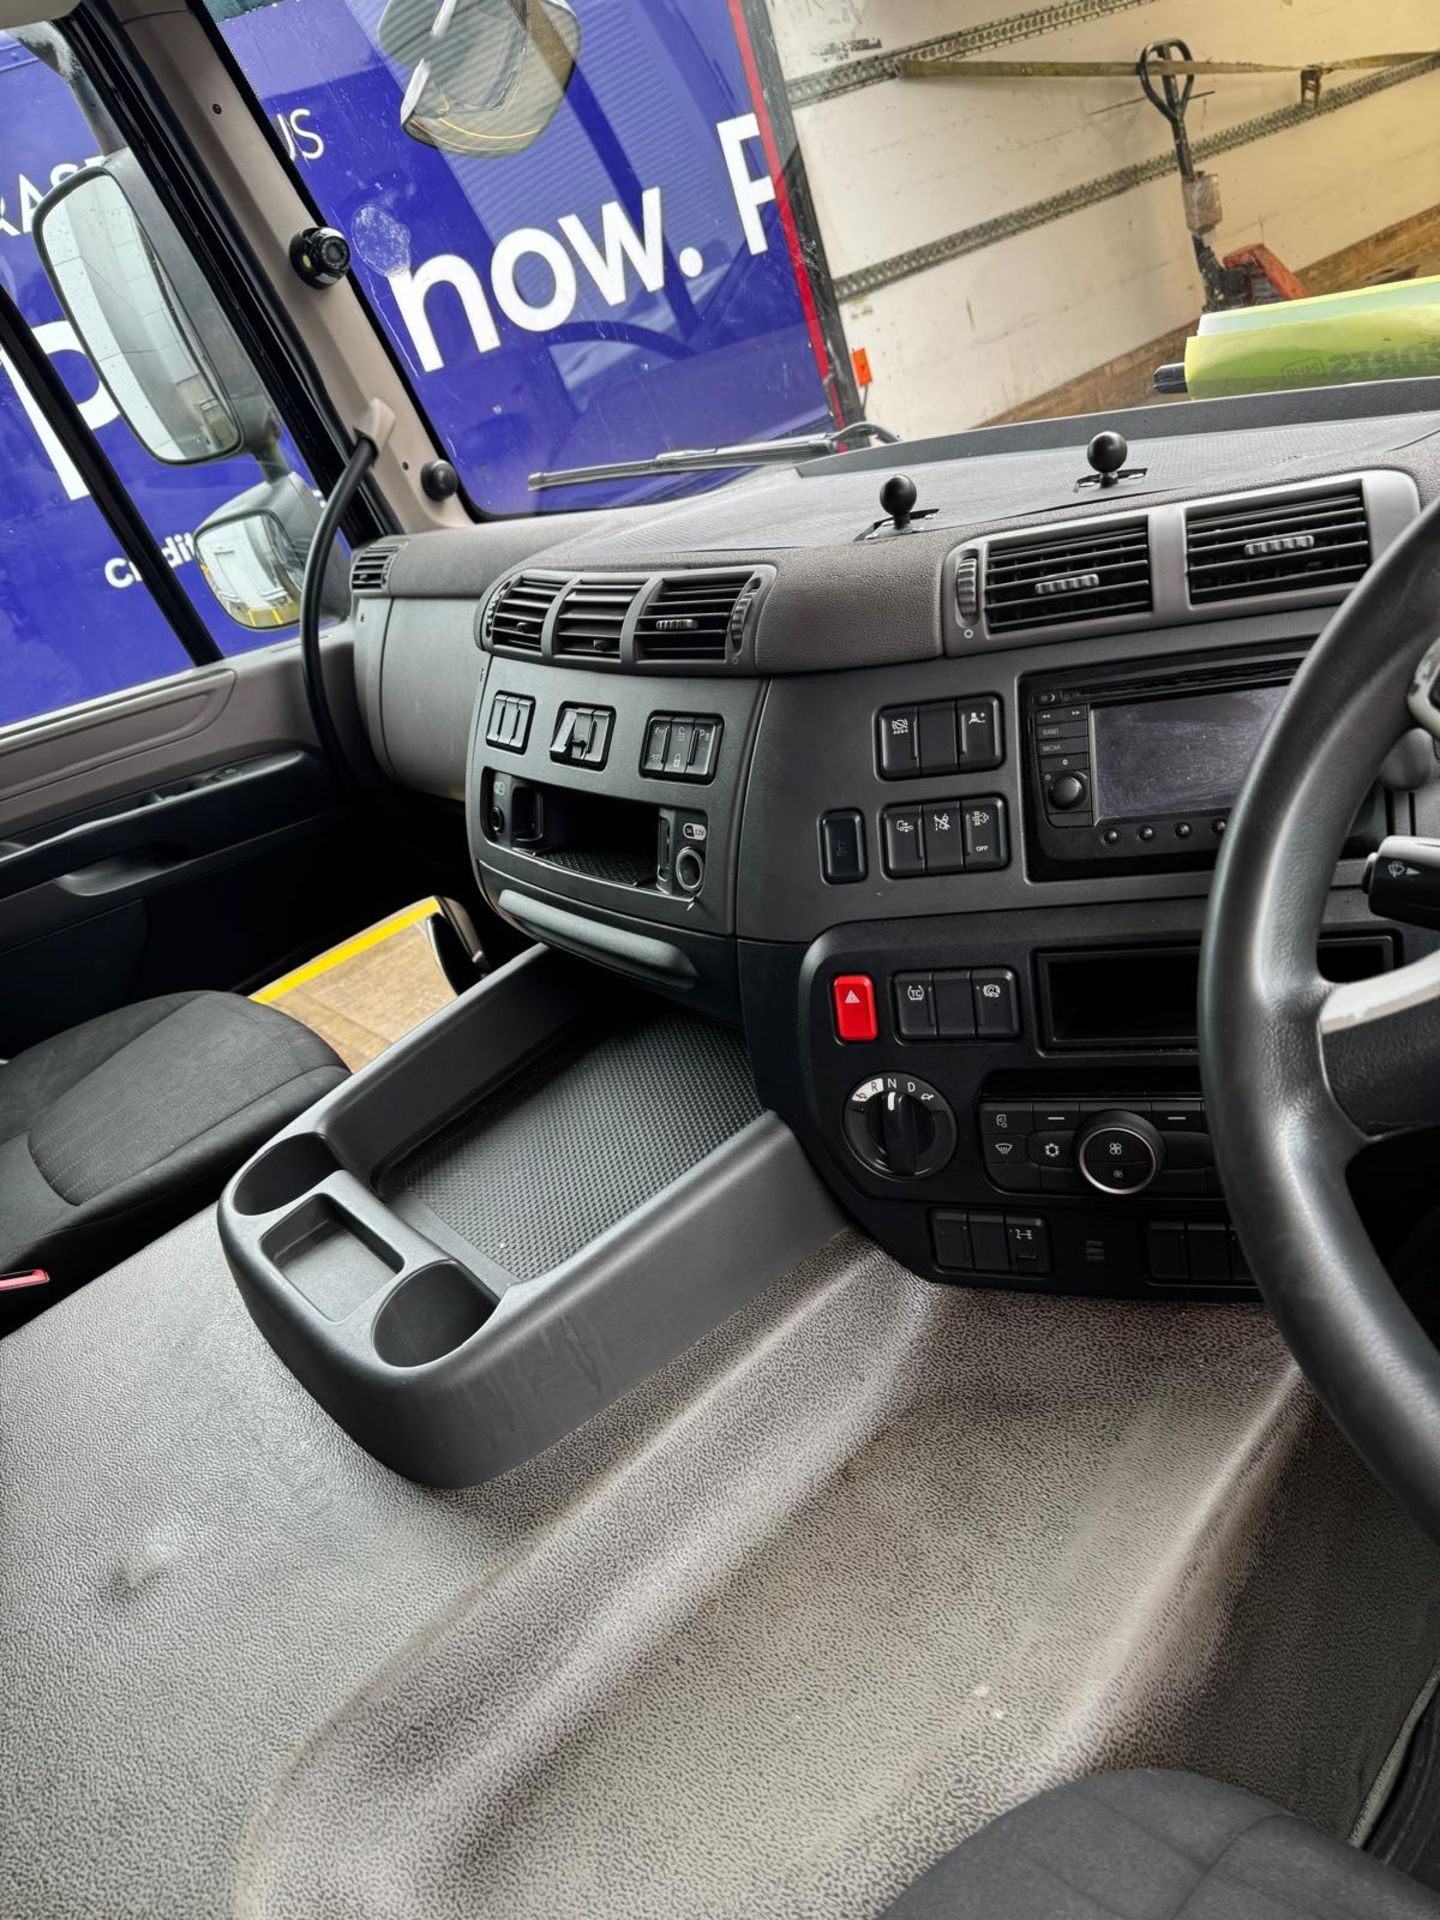 2019, DAF CF 260 FA (Ex-Fleet Owned & Maintained) - FN69 AXC (18 Ton Rigid Truck with Tail Lift) - Bild 6 aus 12